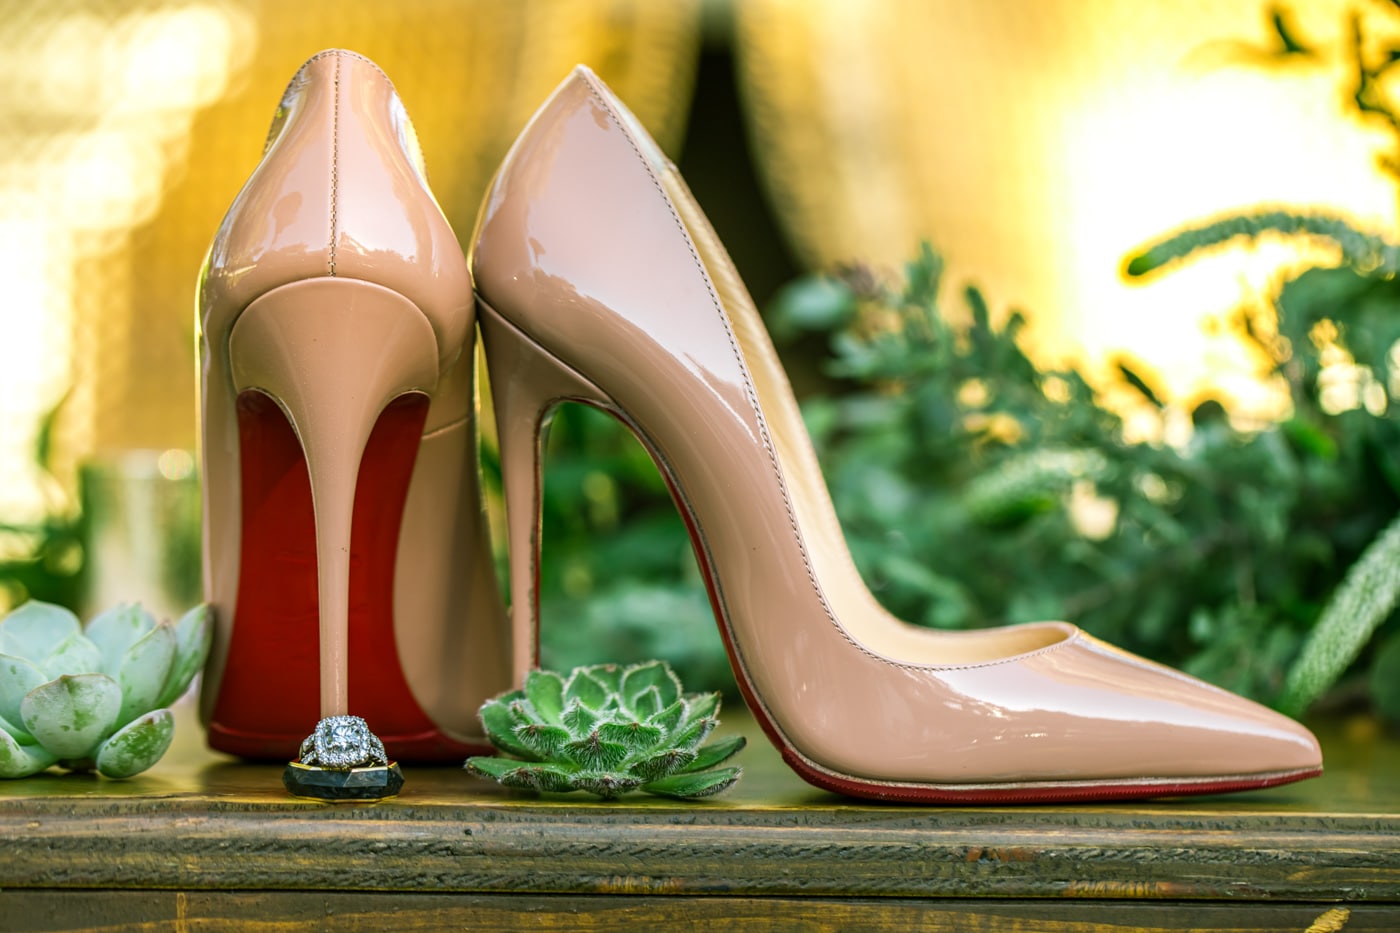 Bride's shoes close up with wedding rings and desert plants